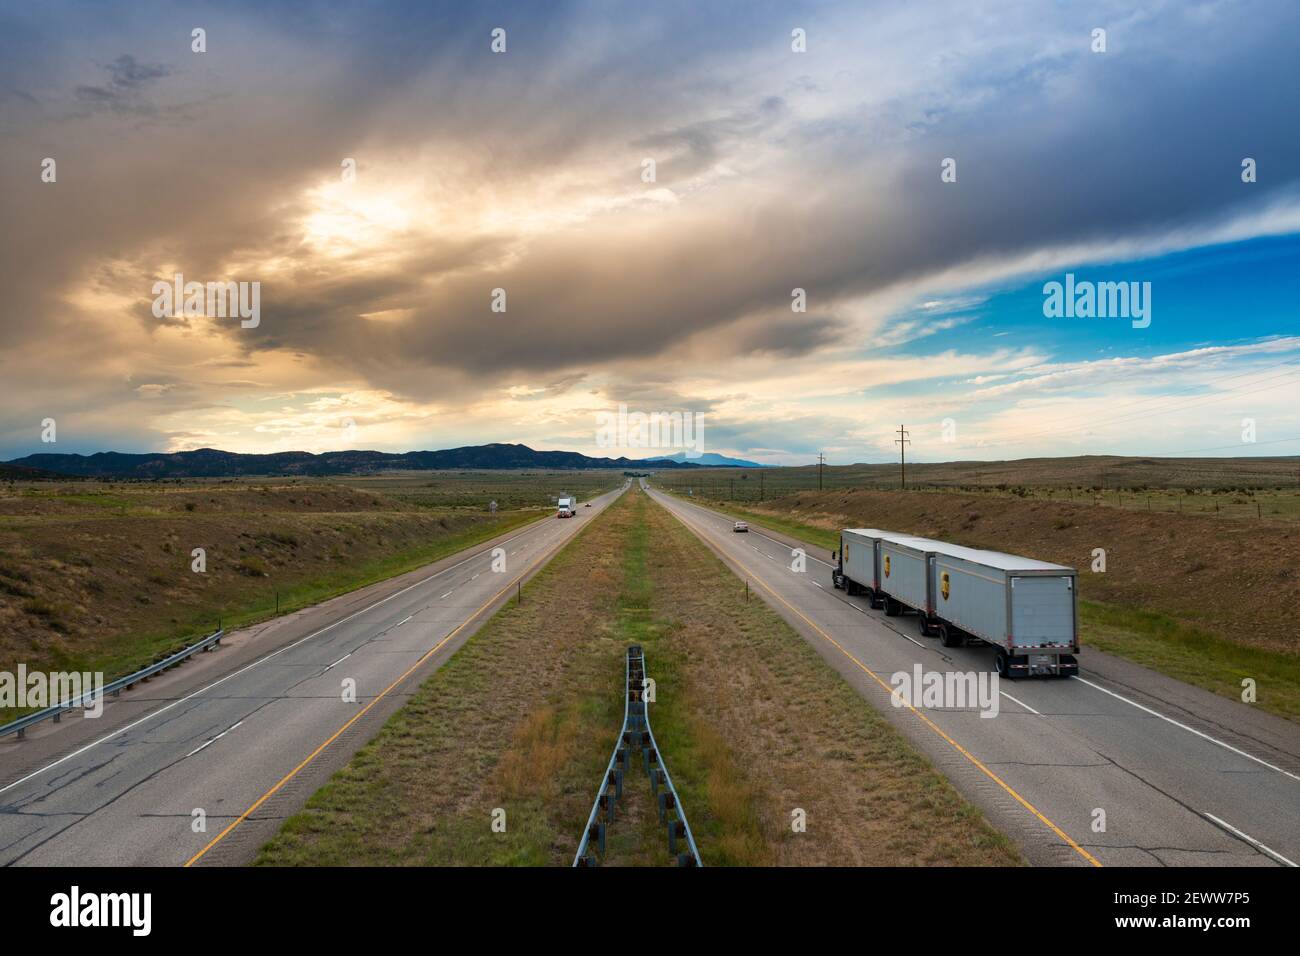 Colorado, USA - July 10, 2014: View of a semi truck at the I 25 interstate highway, in the State of Colorado, USA. Stock Photo